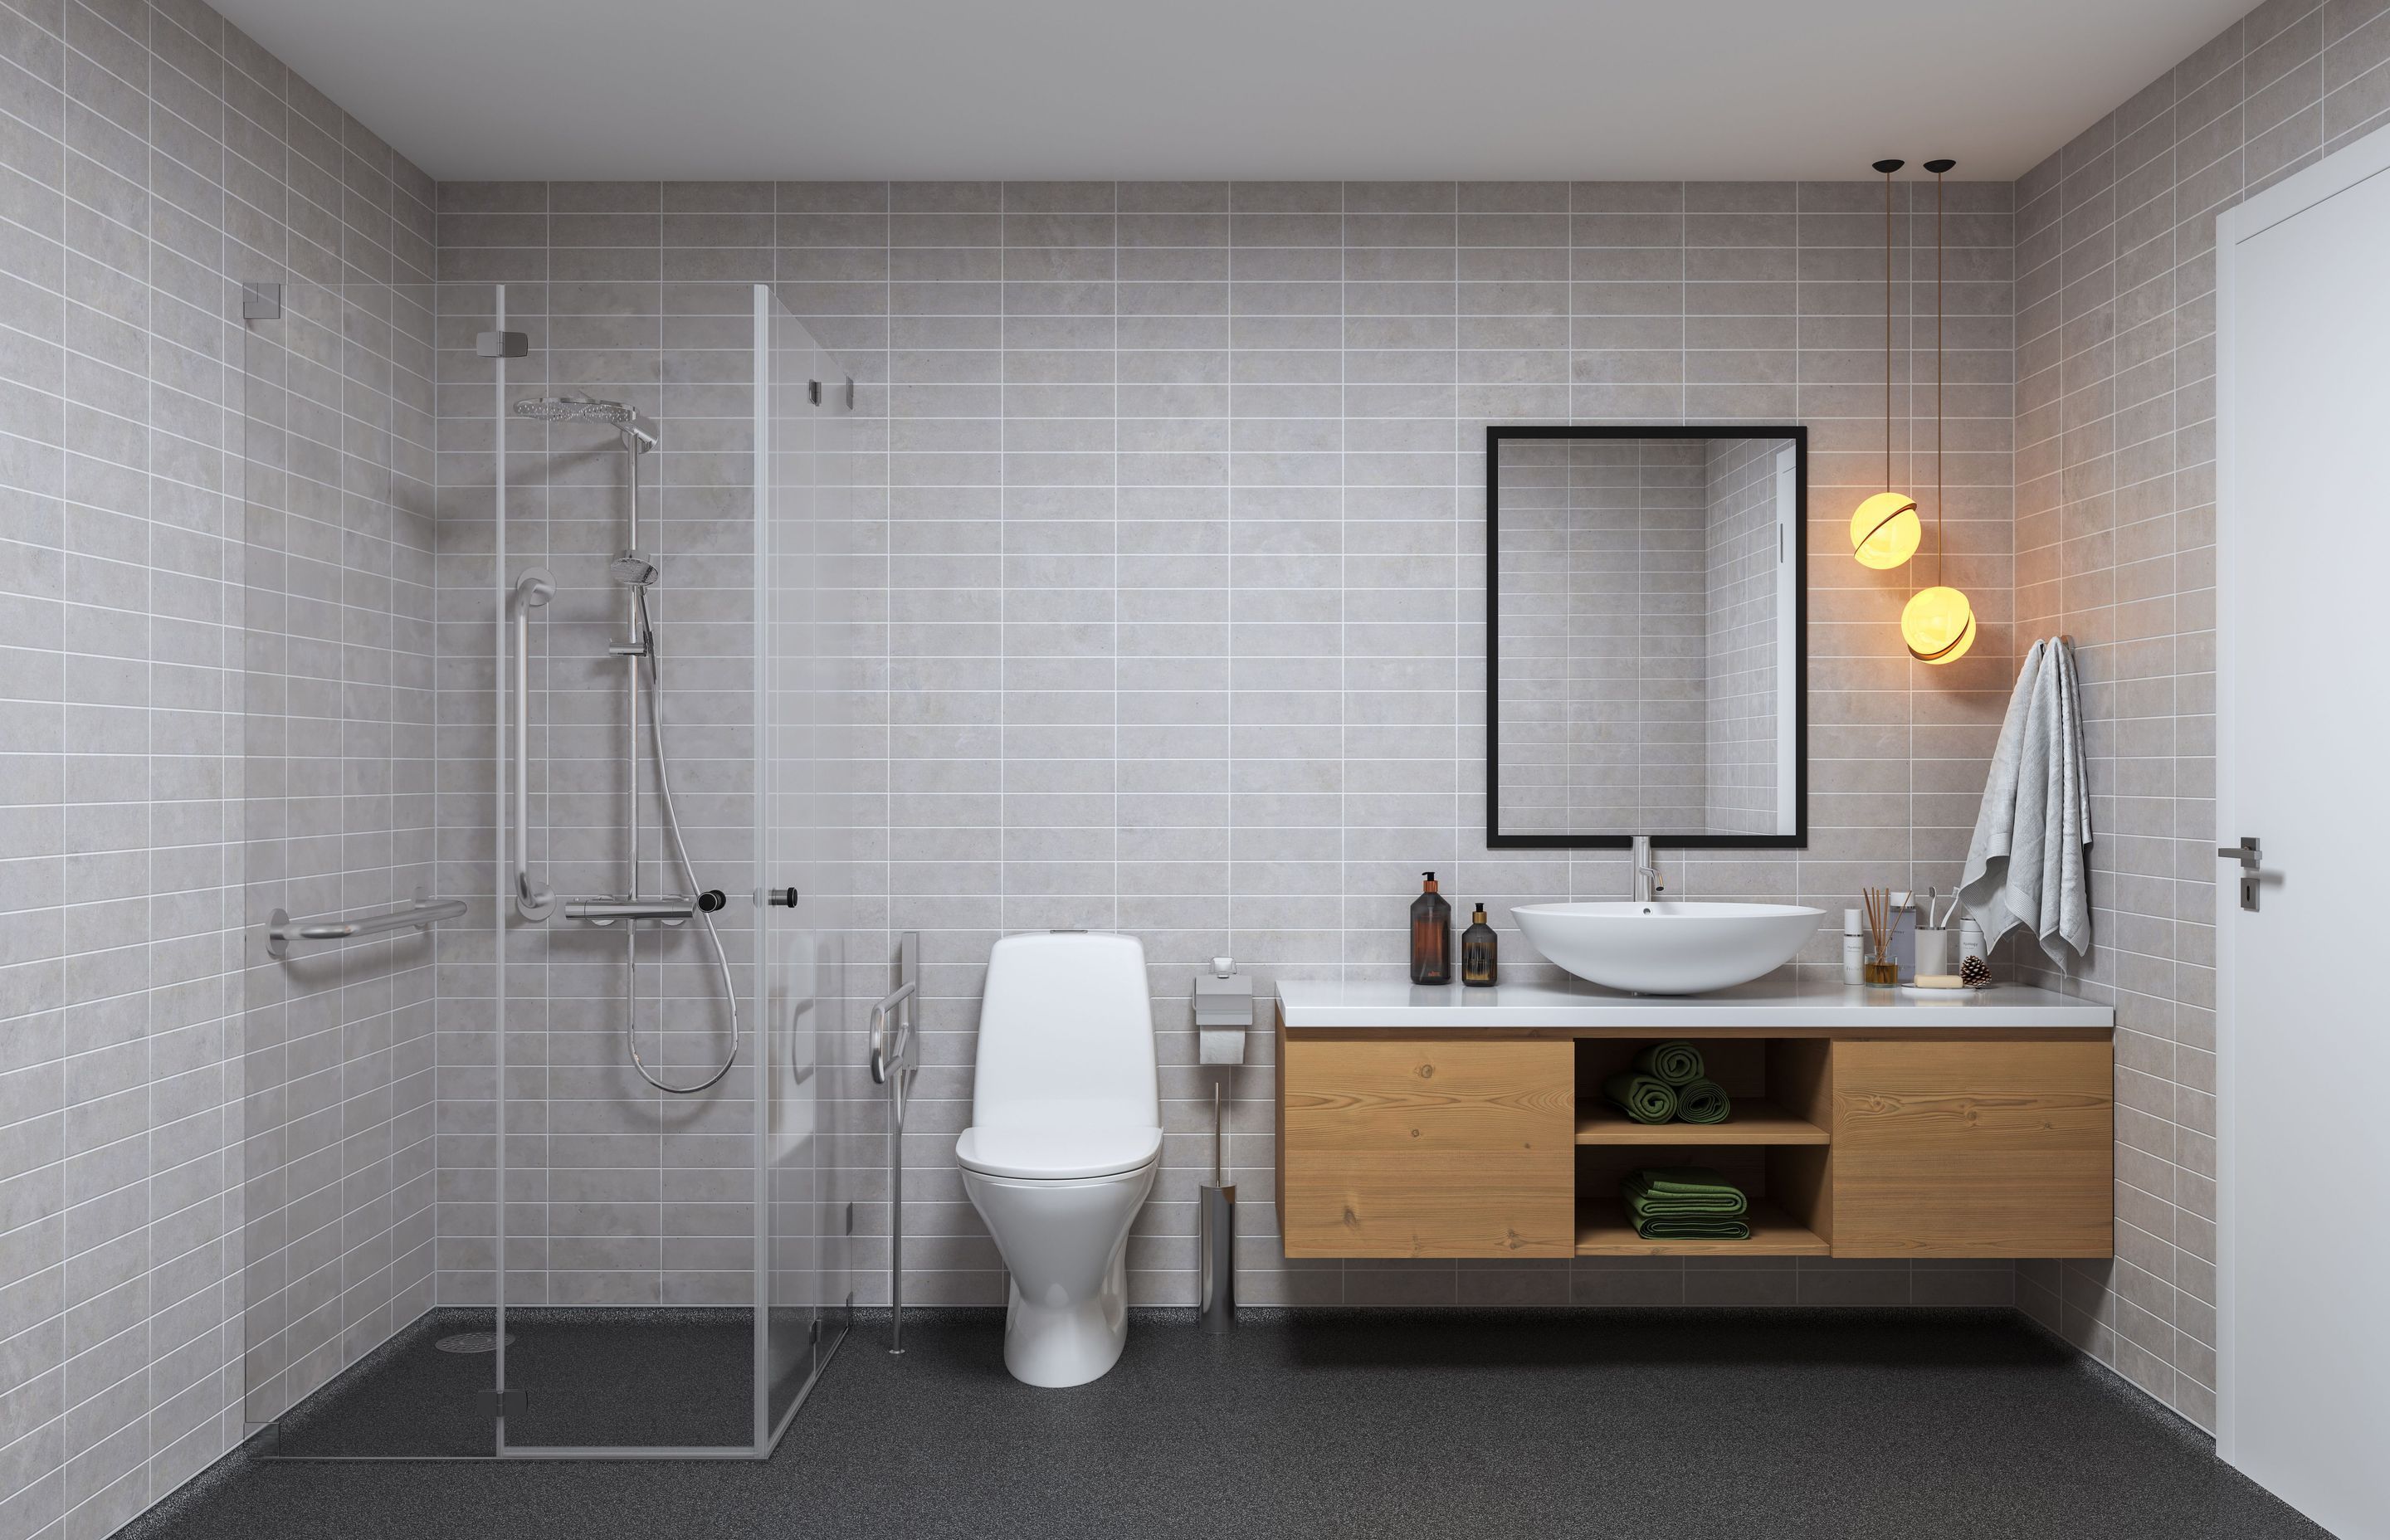 Altro Tegulis – a hygienic wall panel solution with a chic, authentic tile look and feel